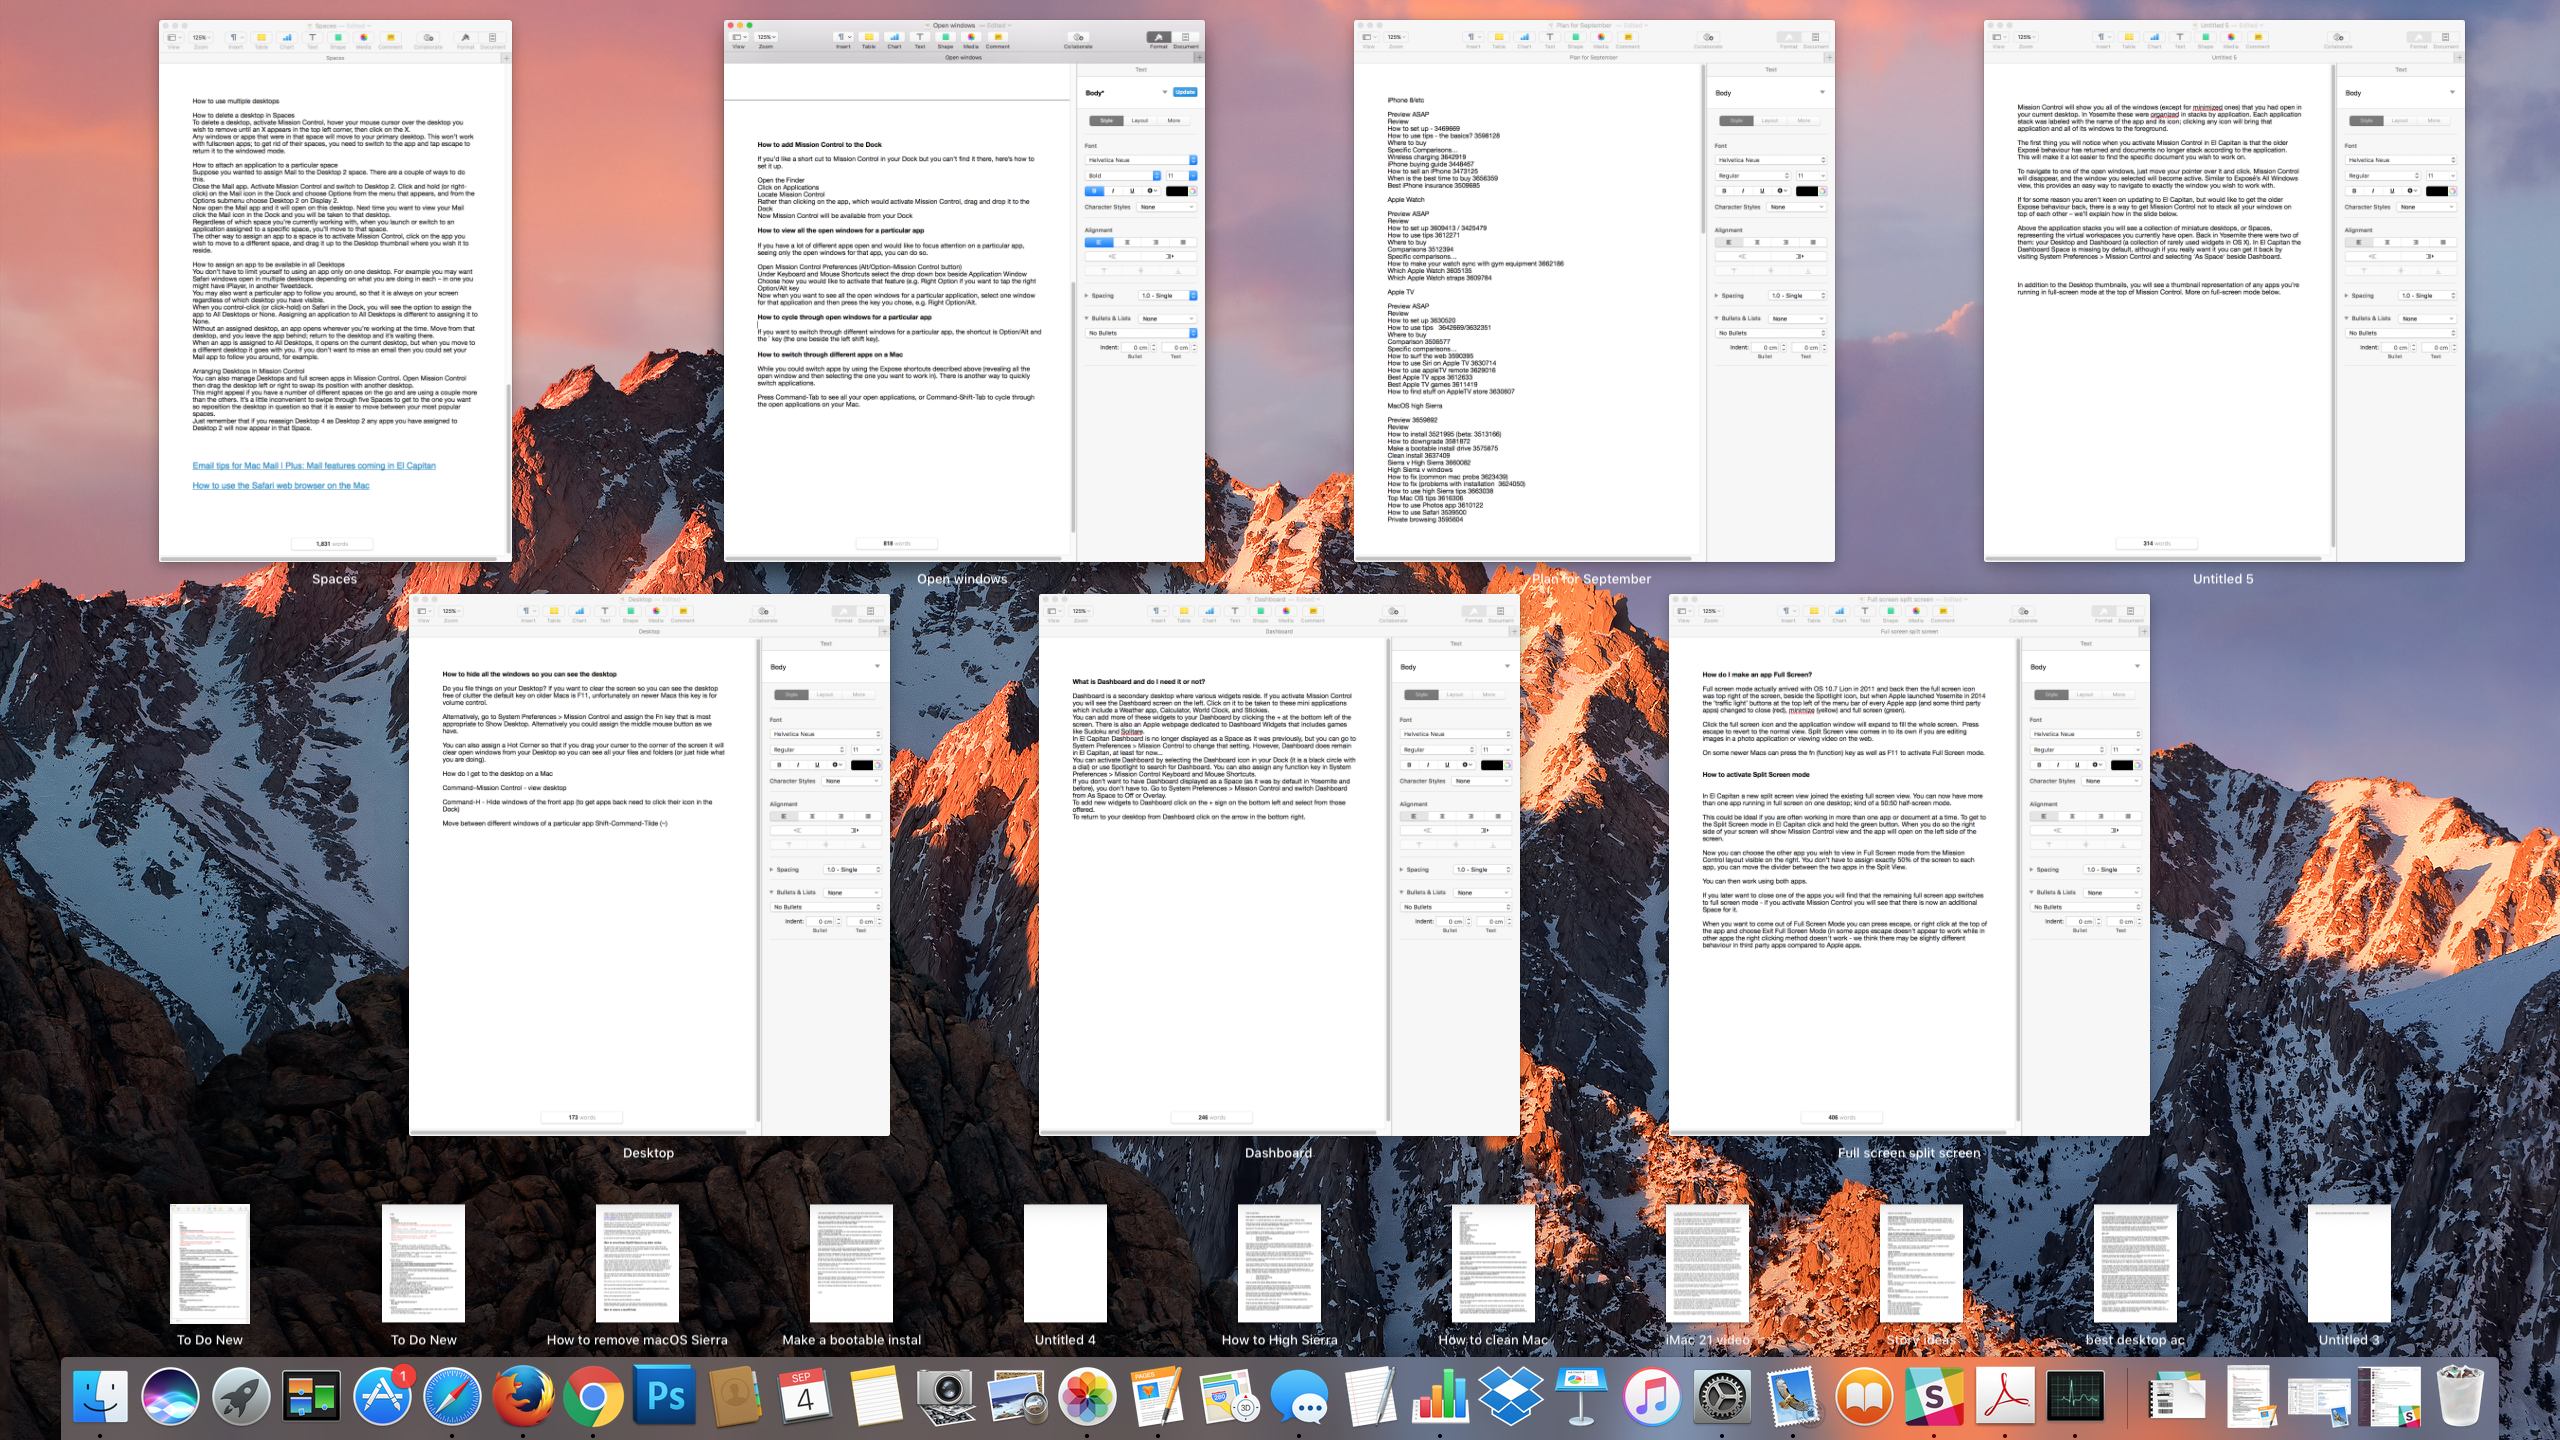 How to see what apps are running on macbook